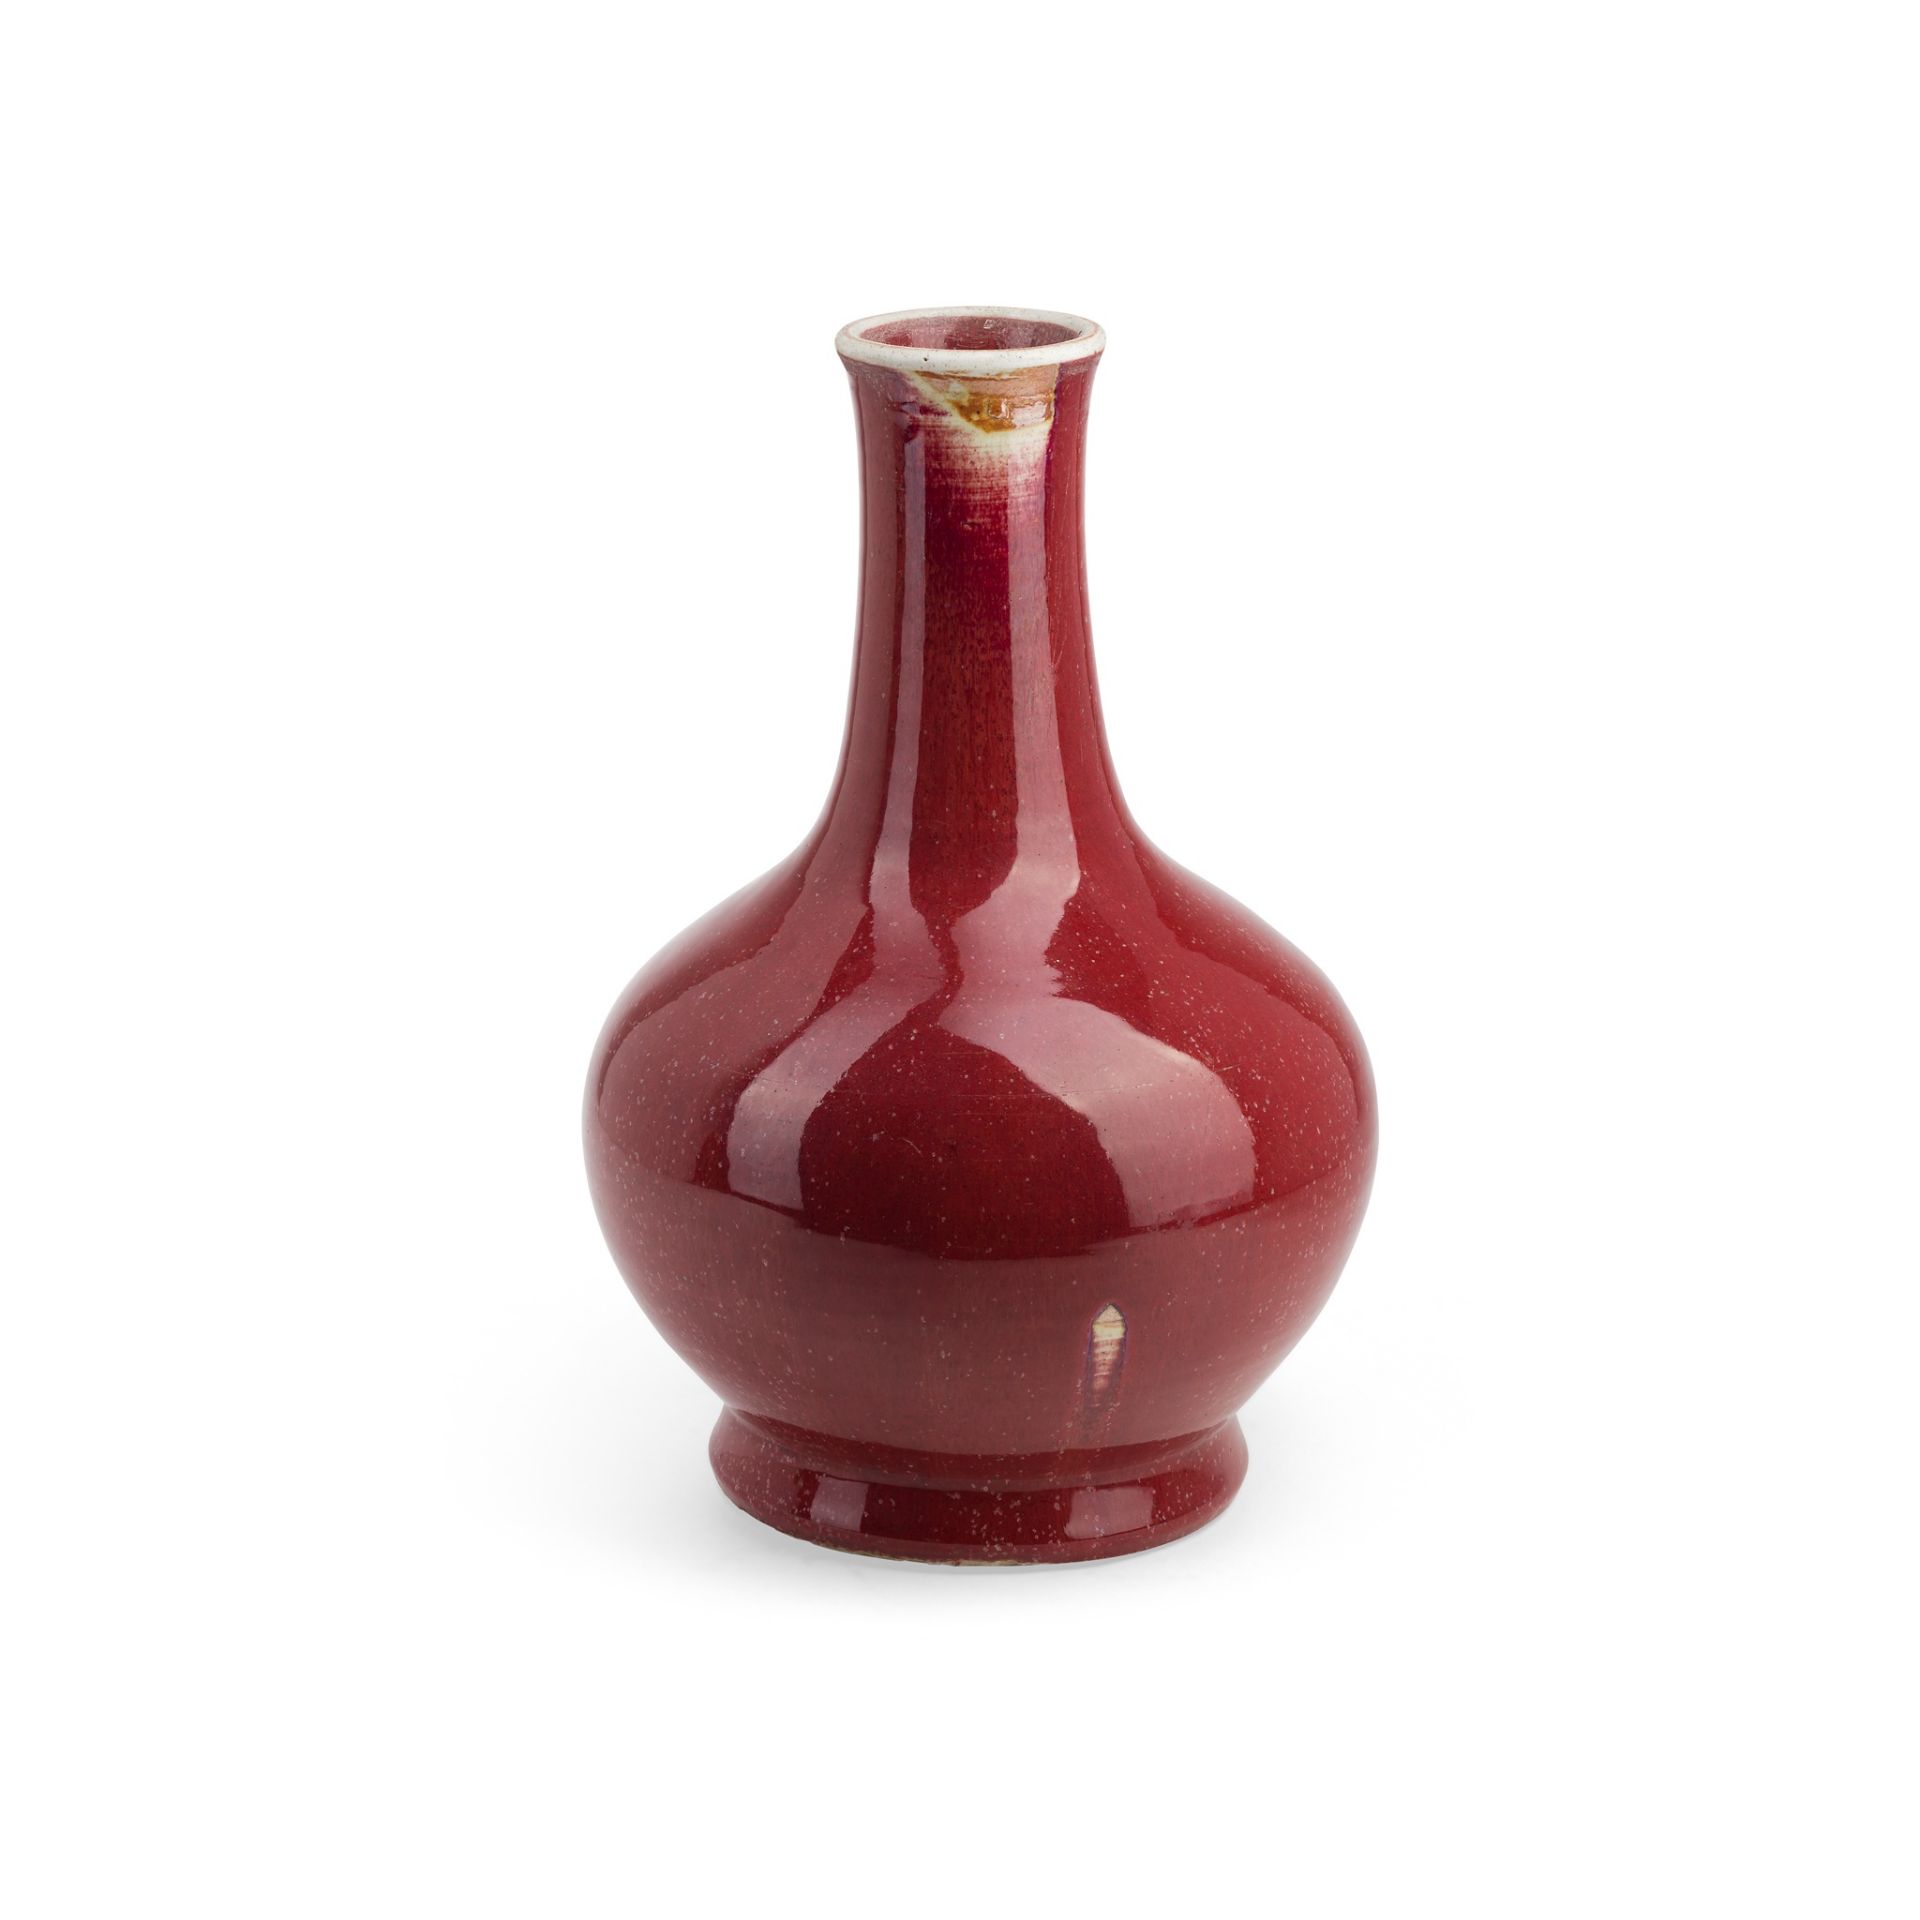 CHINESE COPPER-RED GLAZED PORCELAIN VASE LATE QING DYNASTY/REPUBLIC PERIOD, 19TH/20TH CENTURY